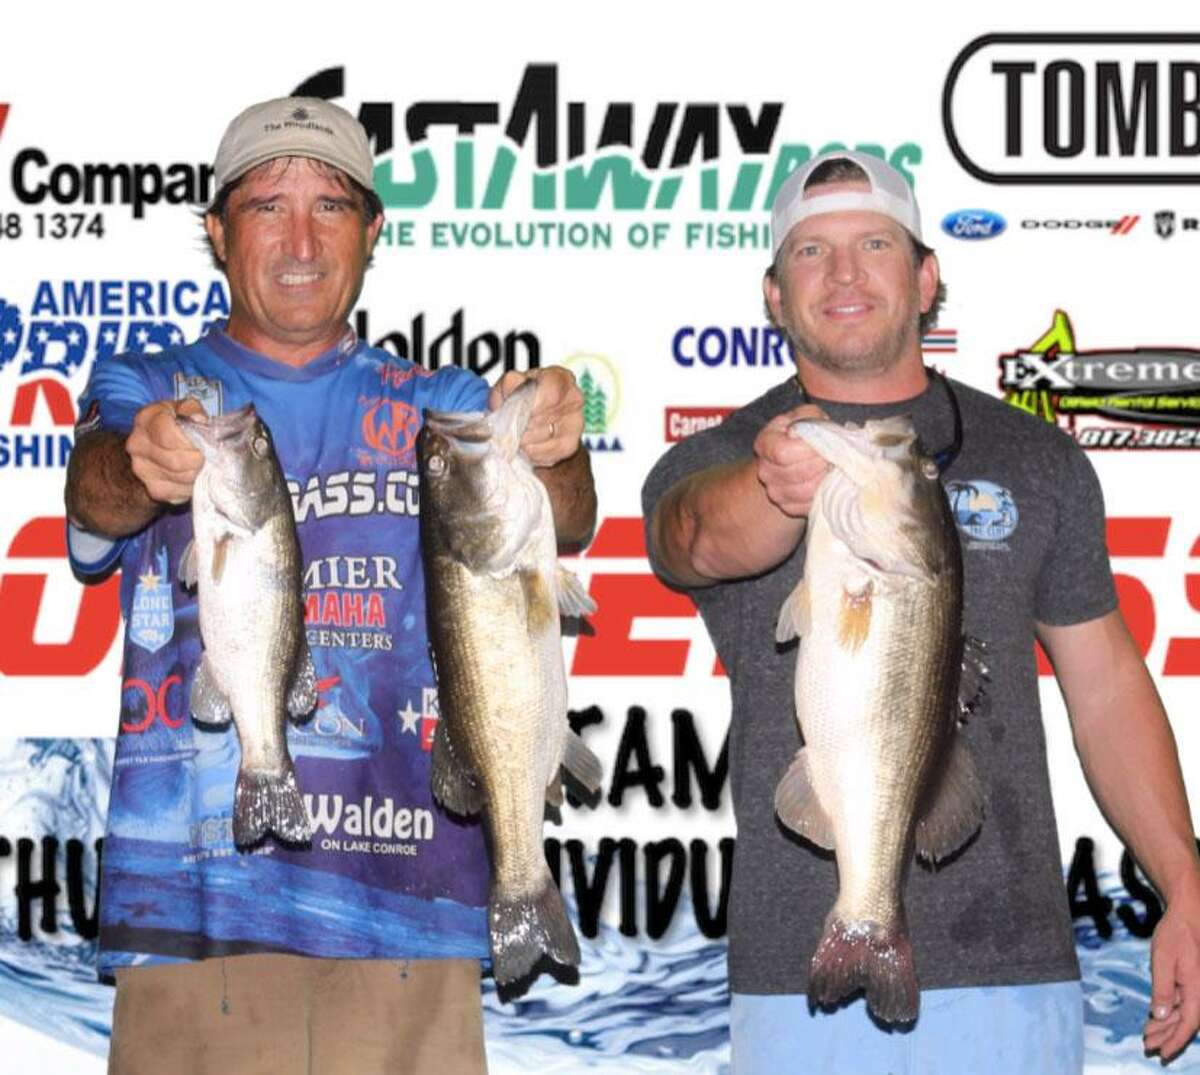 Robert Baney and Brandon Wilson won the CONROEBASS Tuesday Tournament with a stringer total weight of 13.22 pounds.